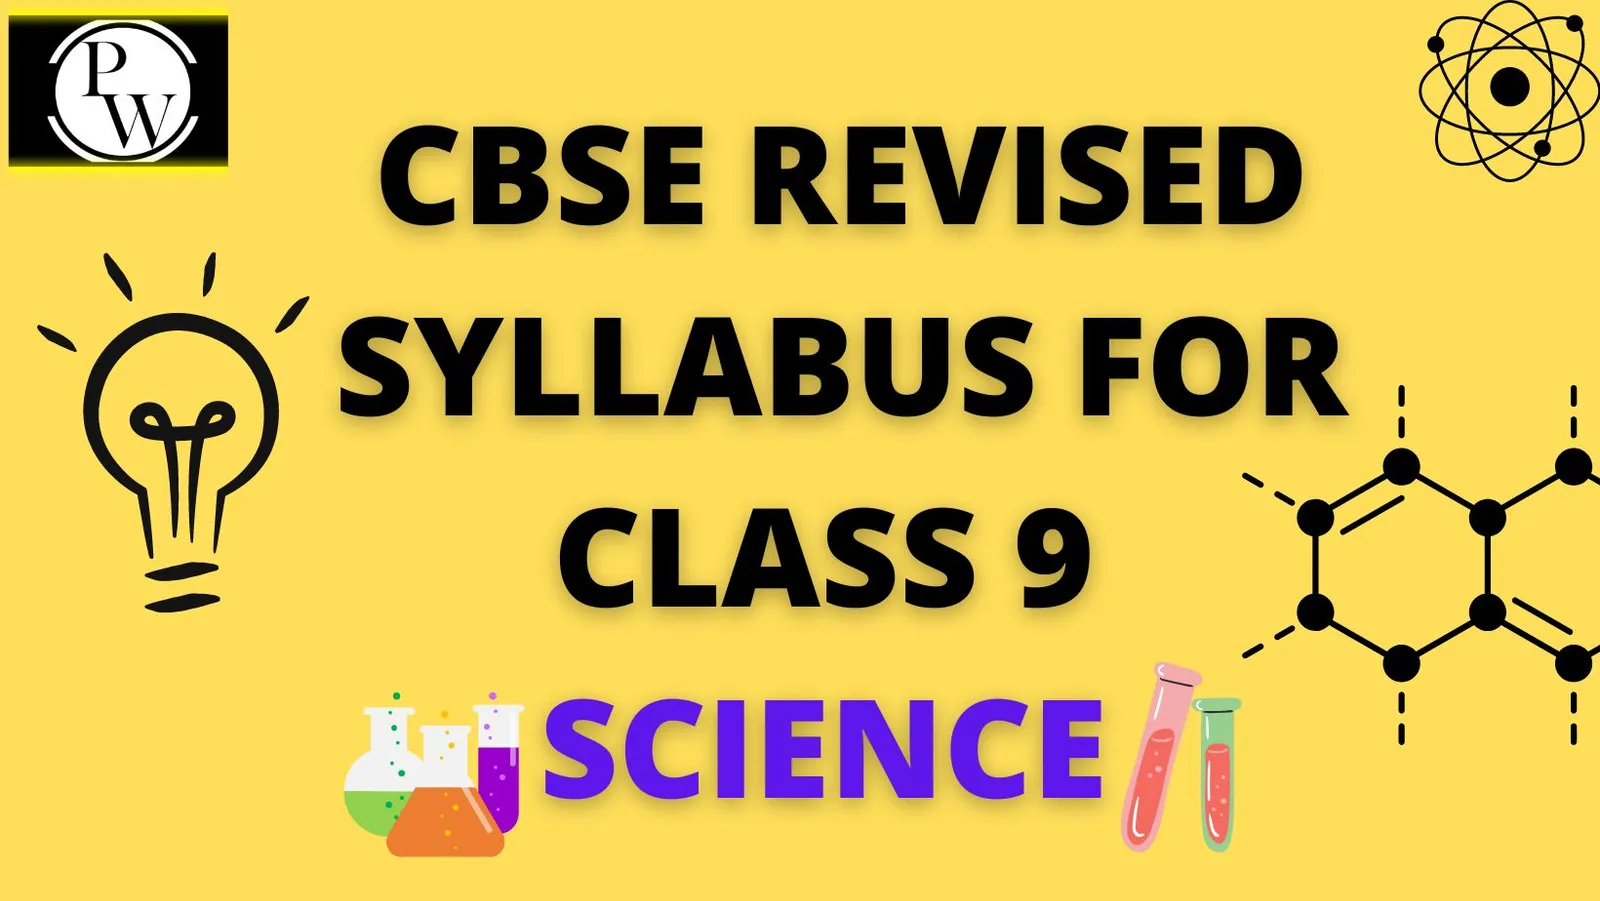 CBSE Revised Syllabus for Class 9 Science | Physics Wallah